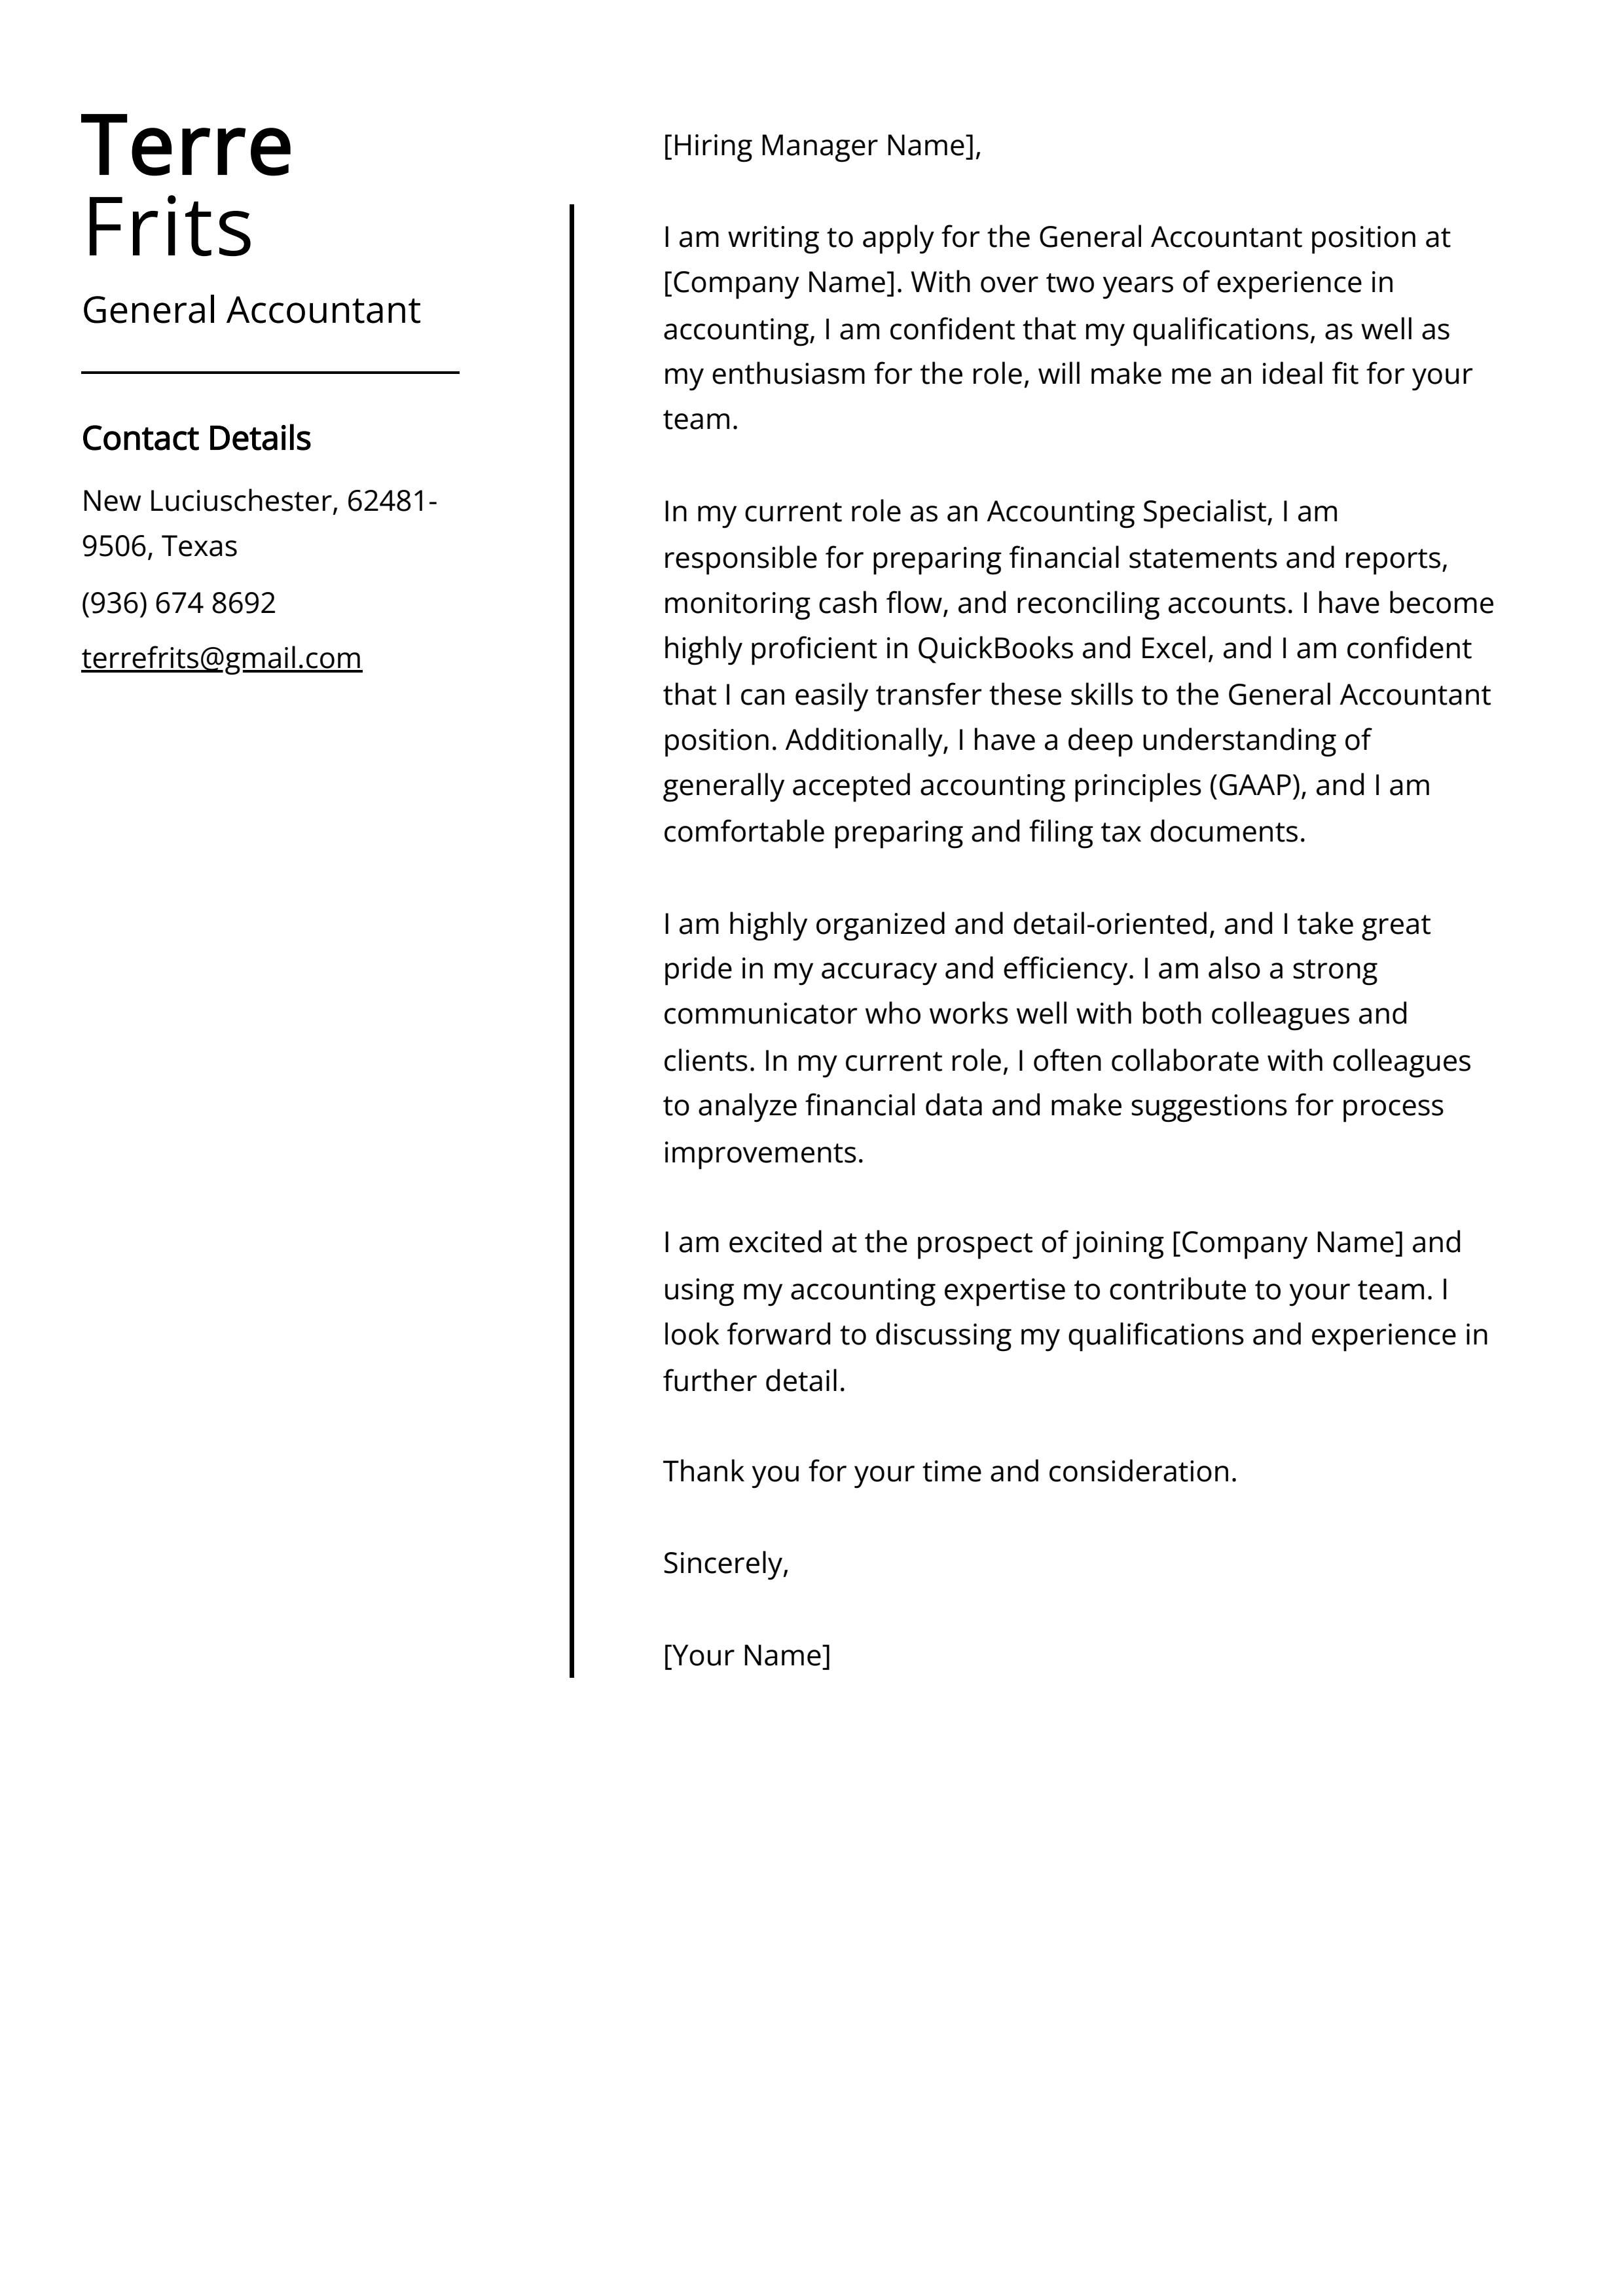 General Accountant Cover Letter Example